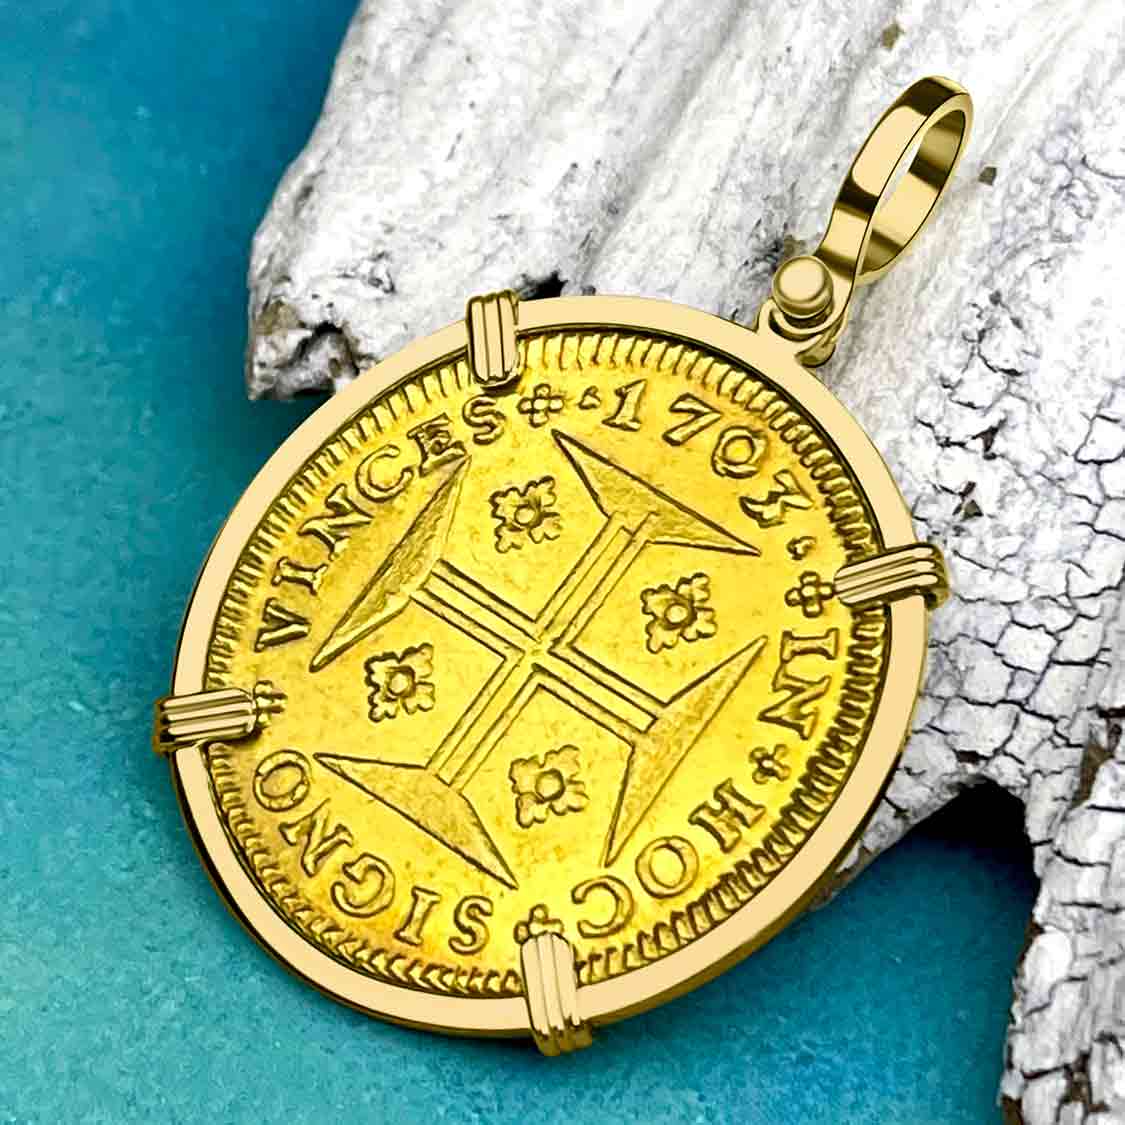 EXTREMELY RARE 1703 Portuguese 22K Gold 4000 Reis "In This Sign Conquer" Crusaders' Cross 18K Gold Coin Pendant